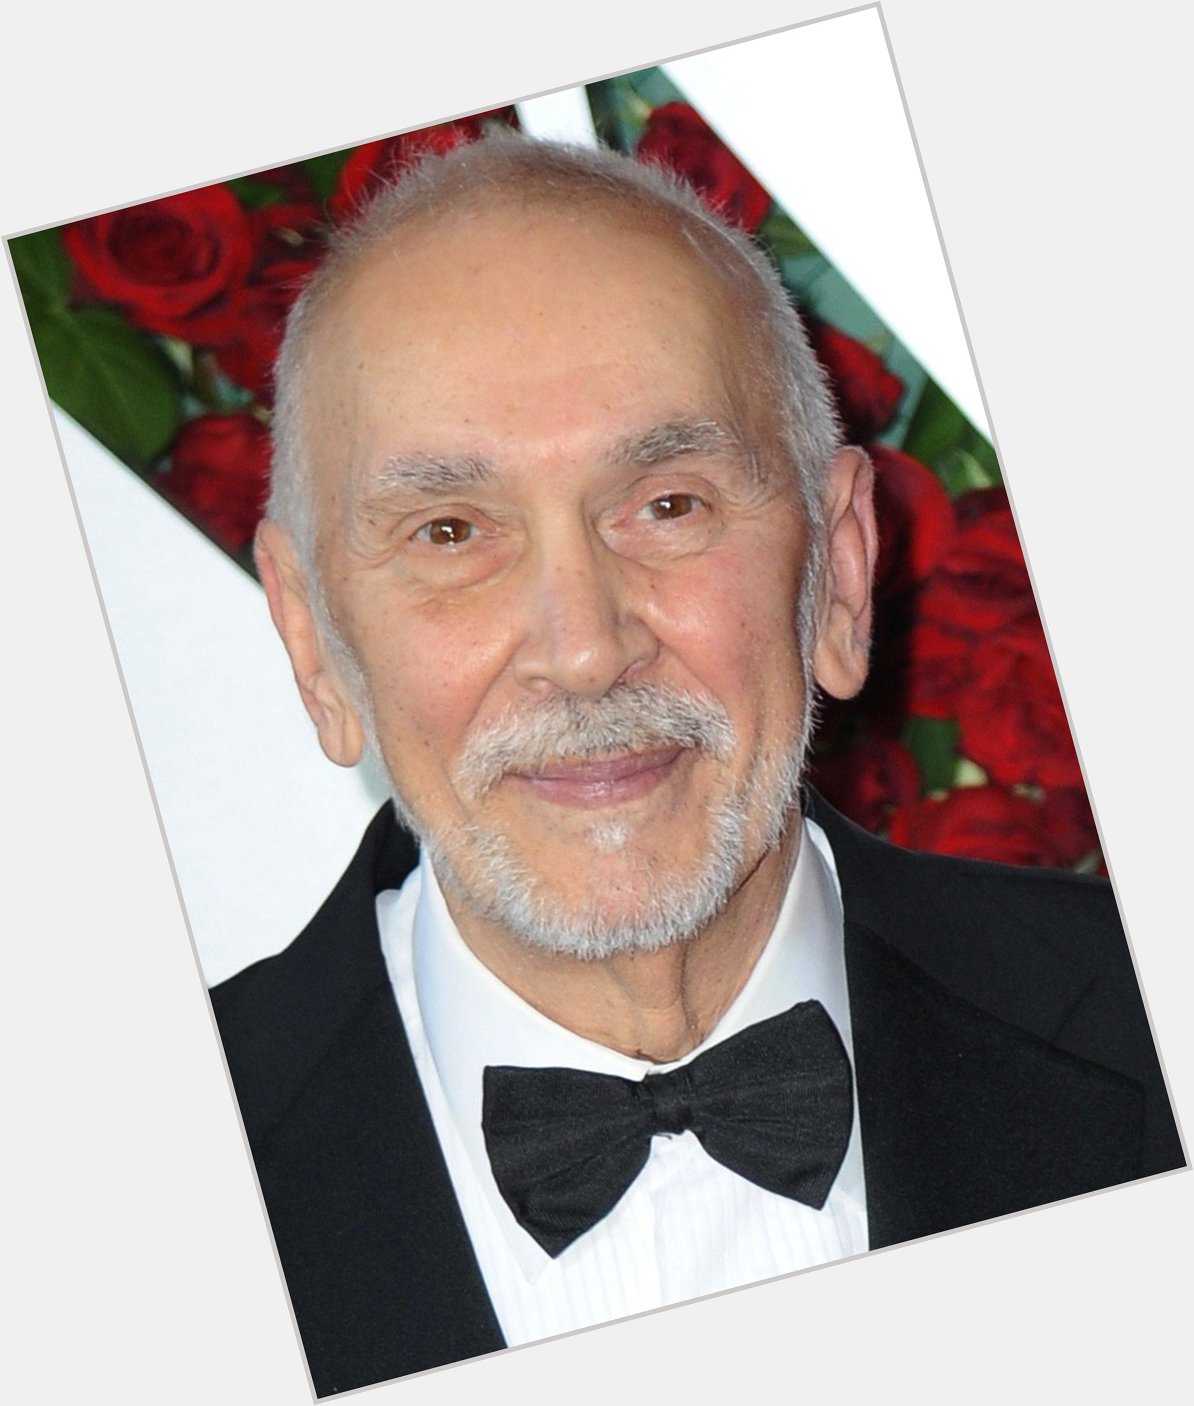 HAPPY 81st BIRTHDAY to FRANK LANGELLA!! 
American stage / film actor, who has won 4 Tony Awards and 2 Obie Awards. 